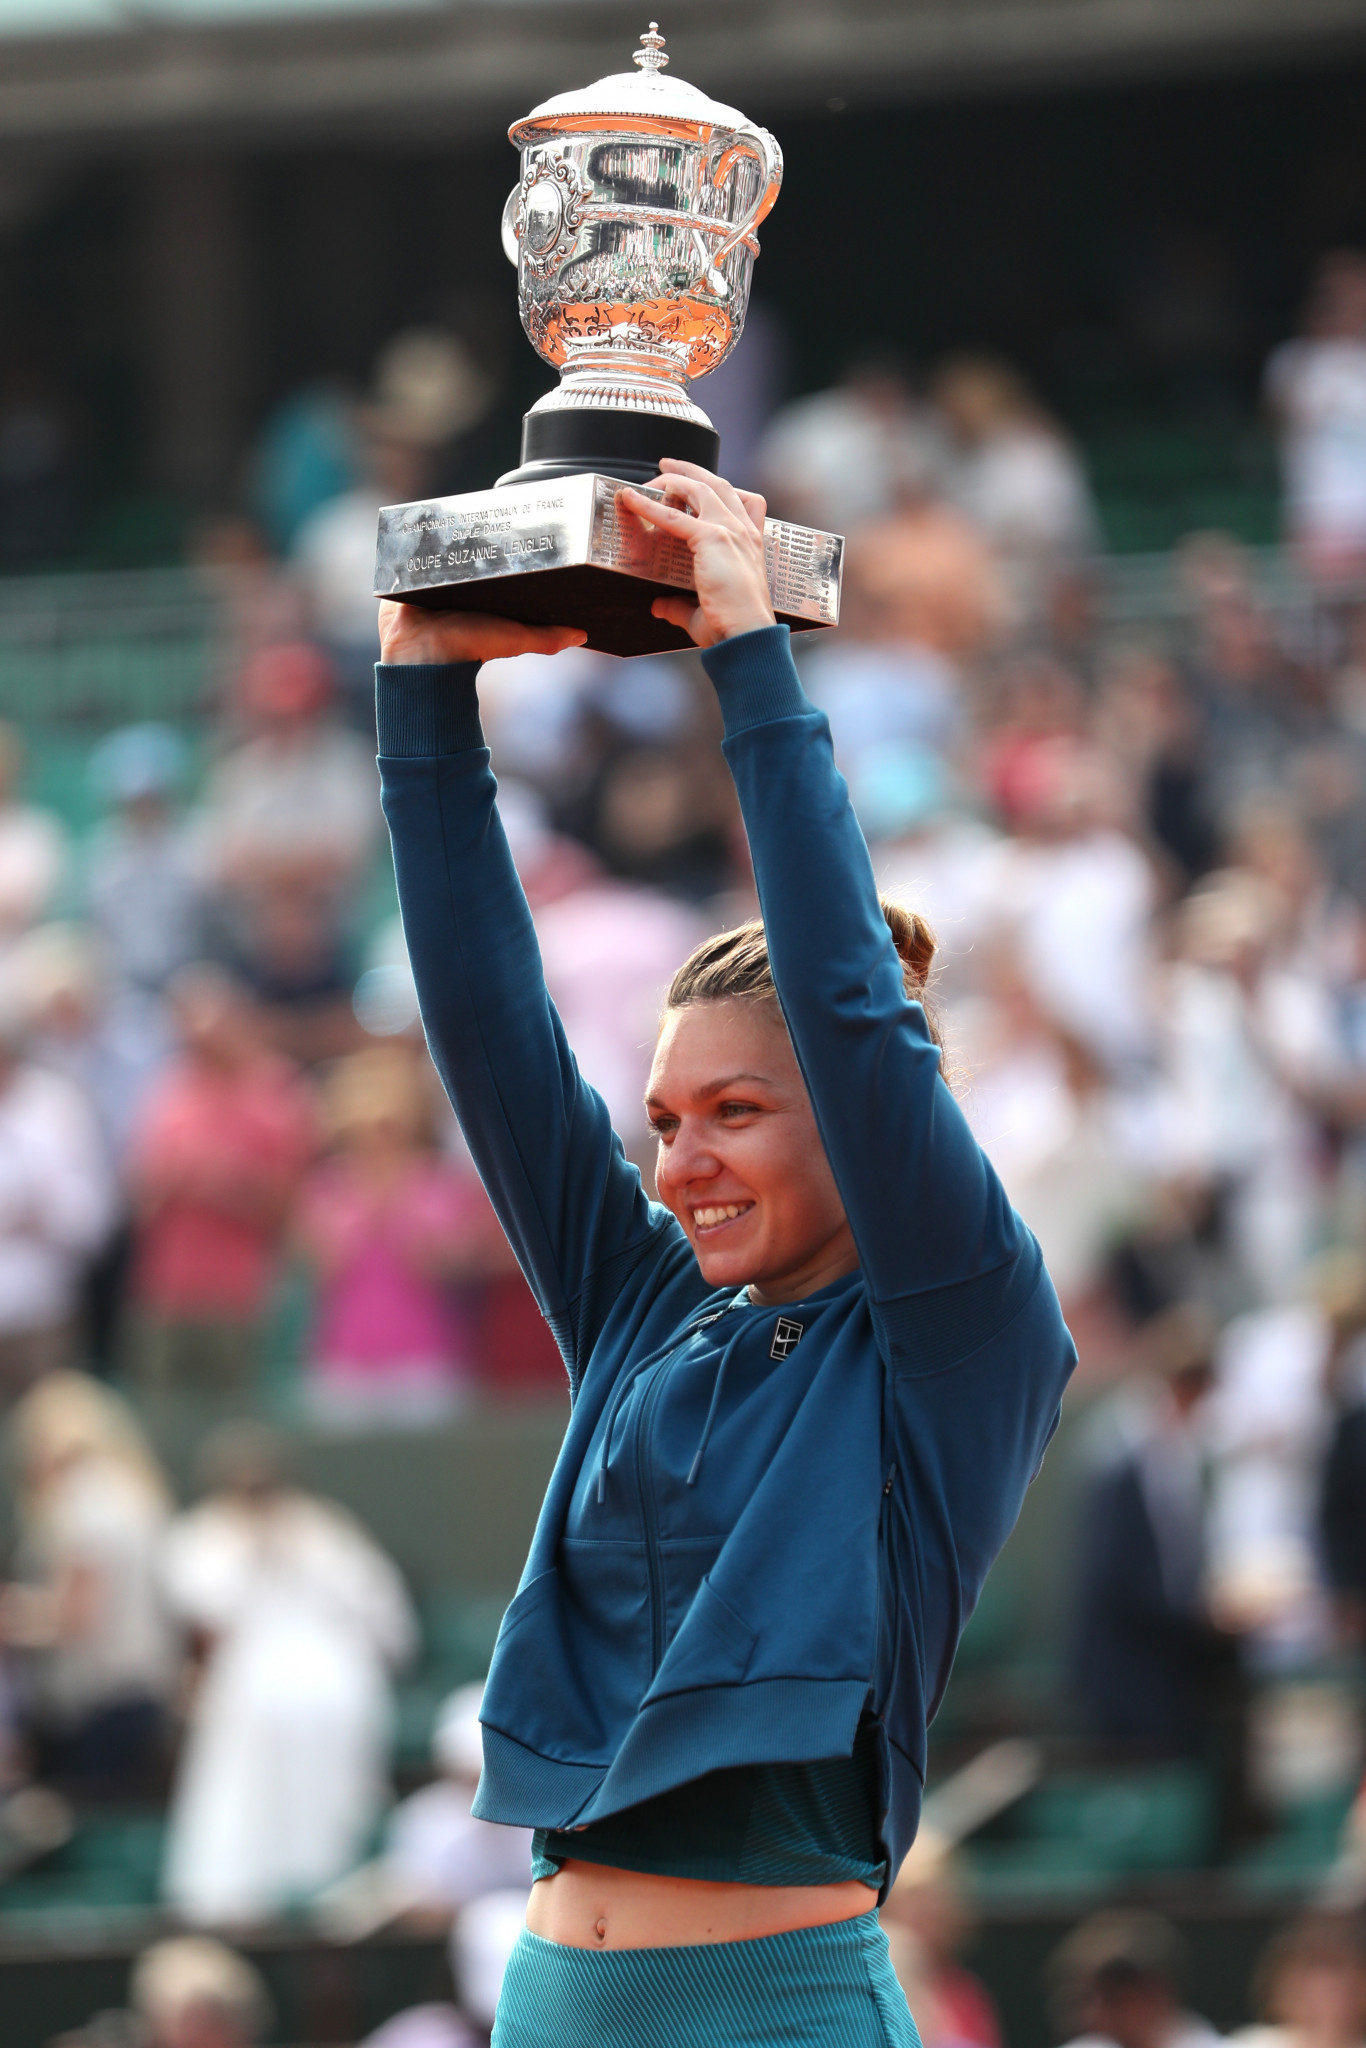 Simona Halep's first Grand Slam title came when she won the 2018 French Open ©Getty Images